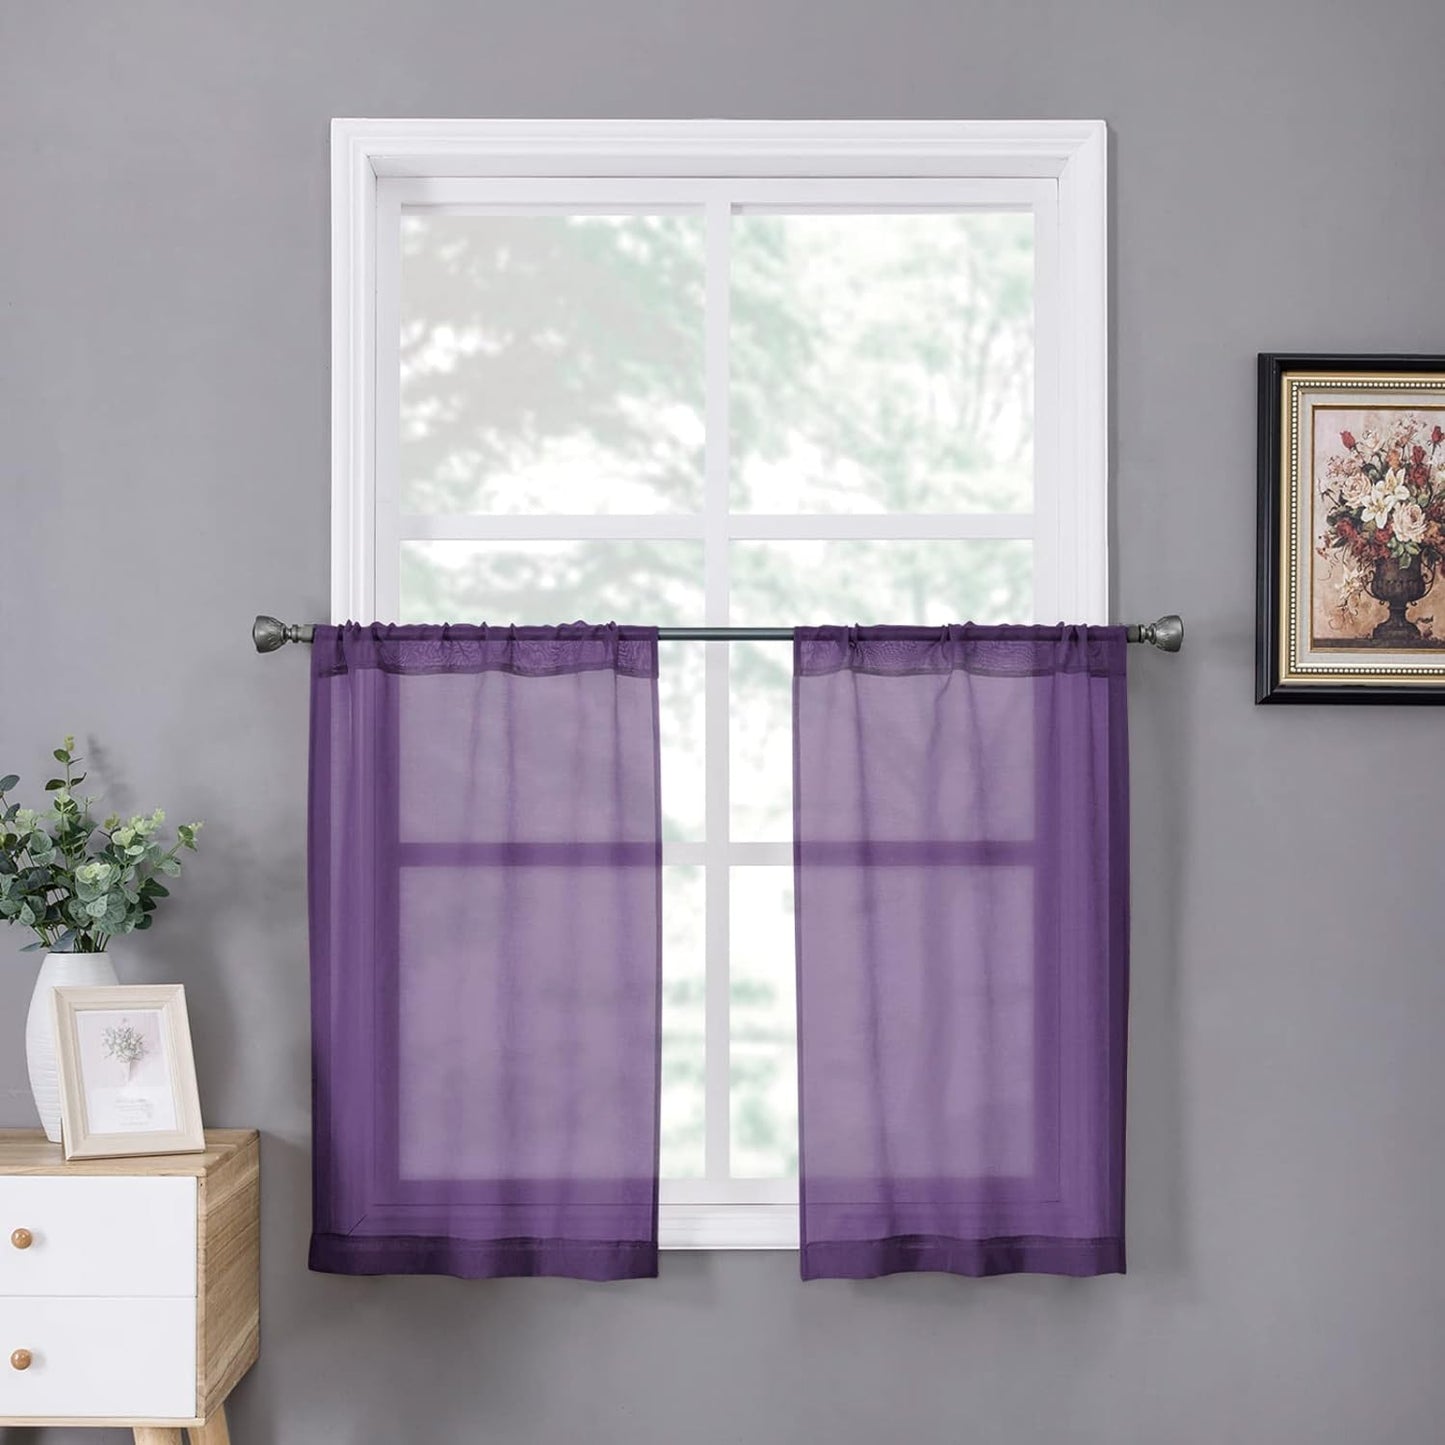 Tollpiz Short Sheer Curtains Linen Textured Bedroom Curtain Sheers Light Filtering Rod Pocket Voile Curtains for Living Room, 54 X 45 Inches Long, White, Set of 2 Panels  Tollpiz Tex Royal Purple 25"W X 36"L 